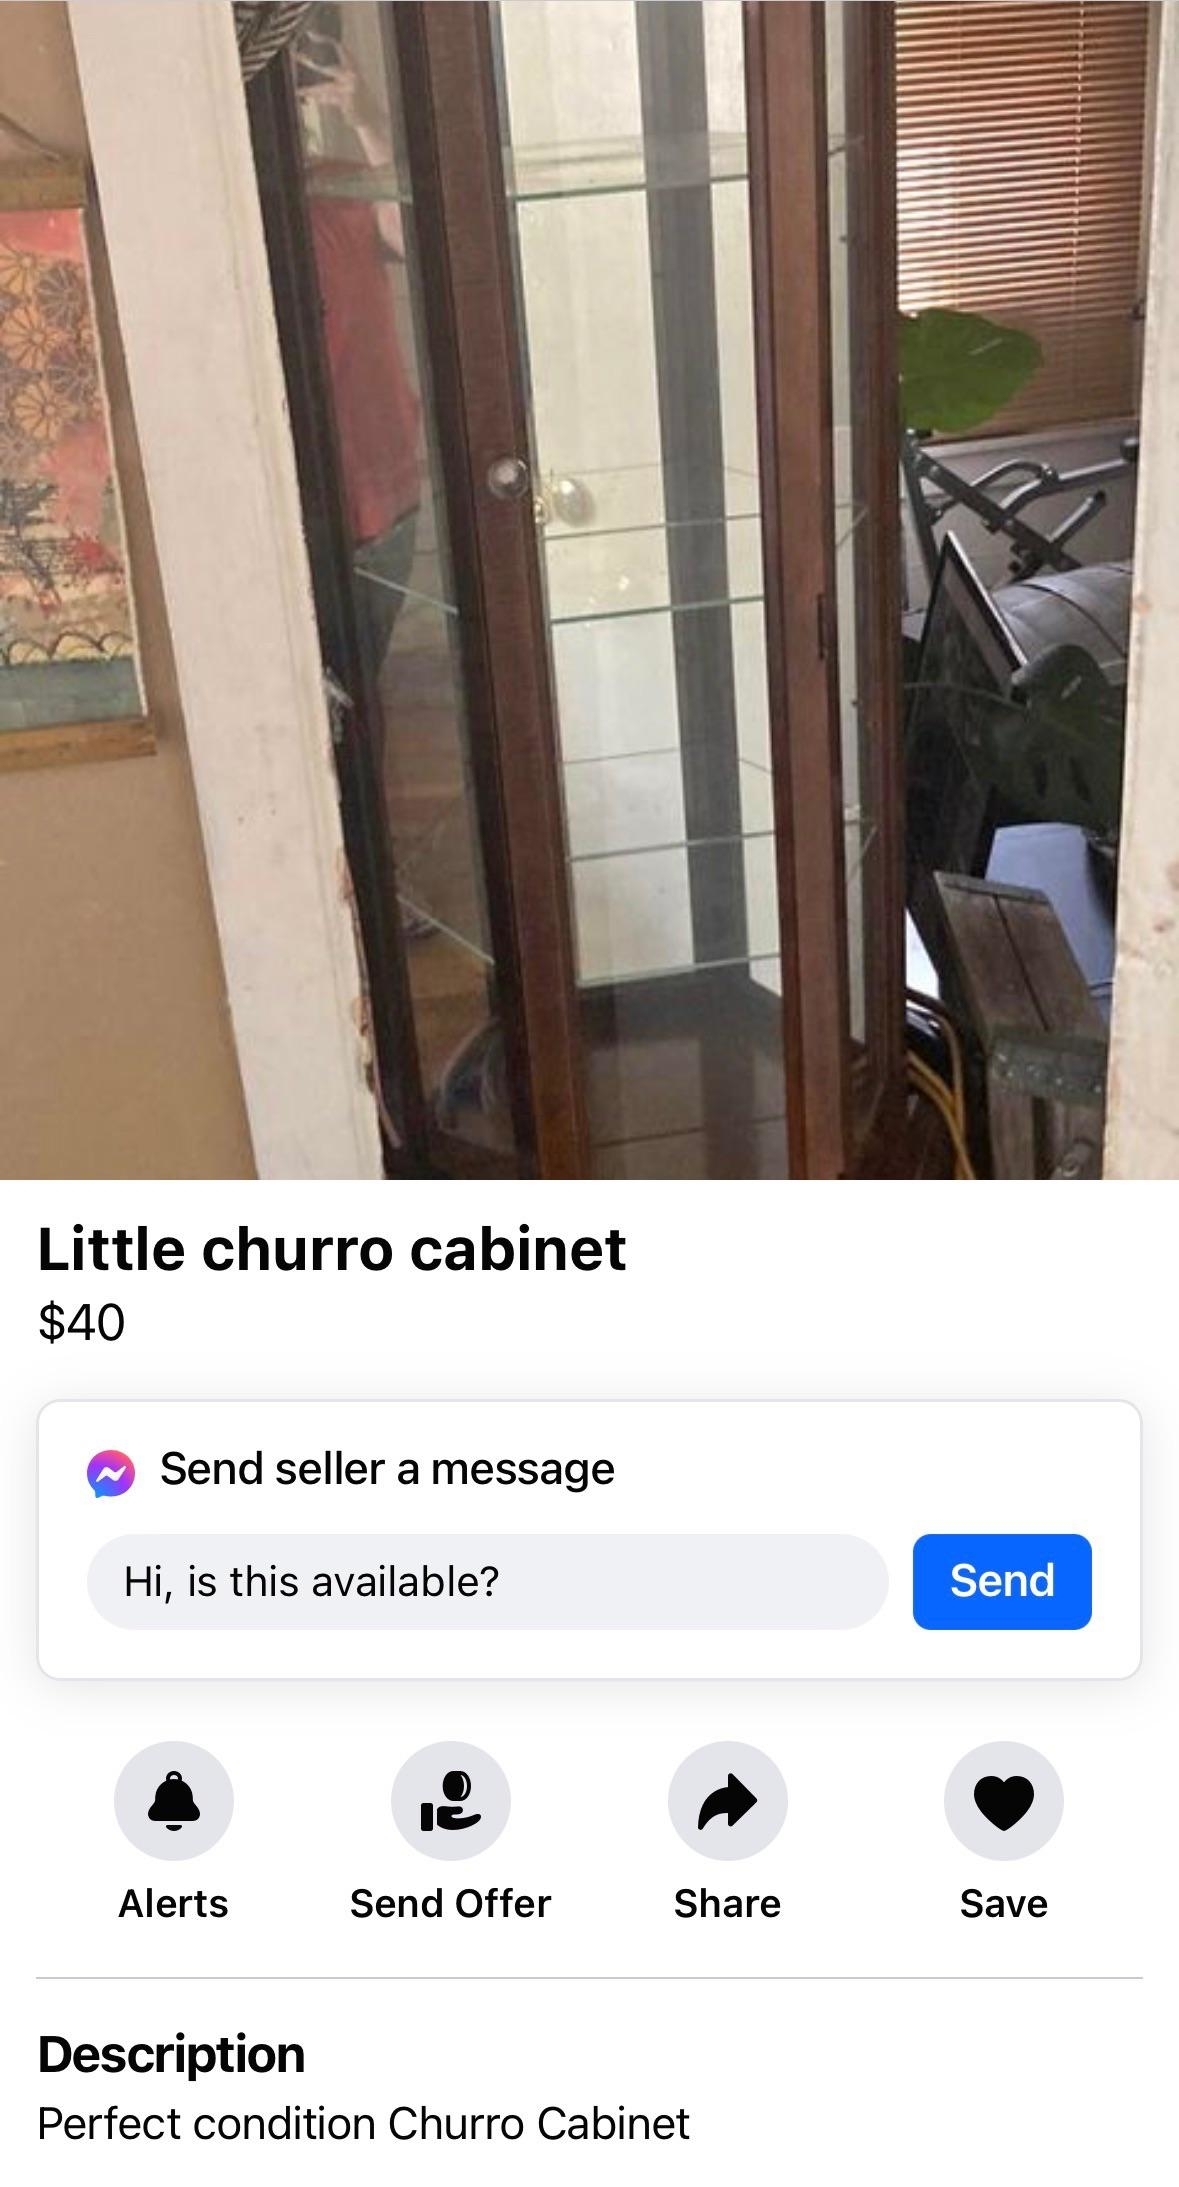 Glass-front cabinet listed for $40 on a selling platform with item description &quot;Perfect condition Churro Cabinet.&quot;